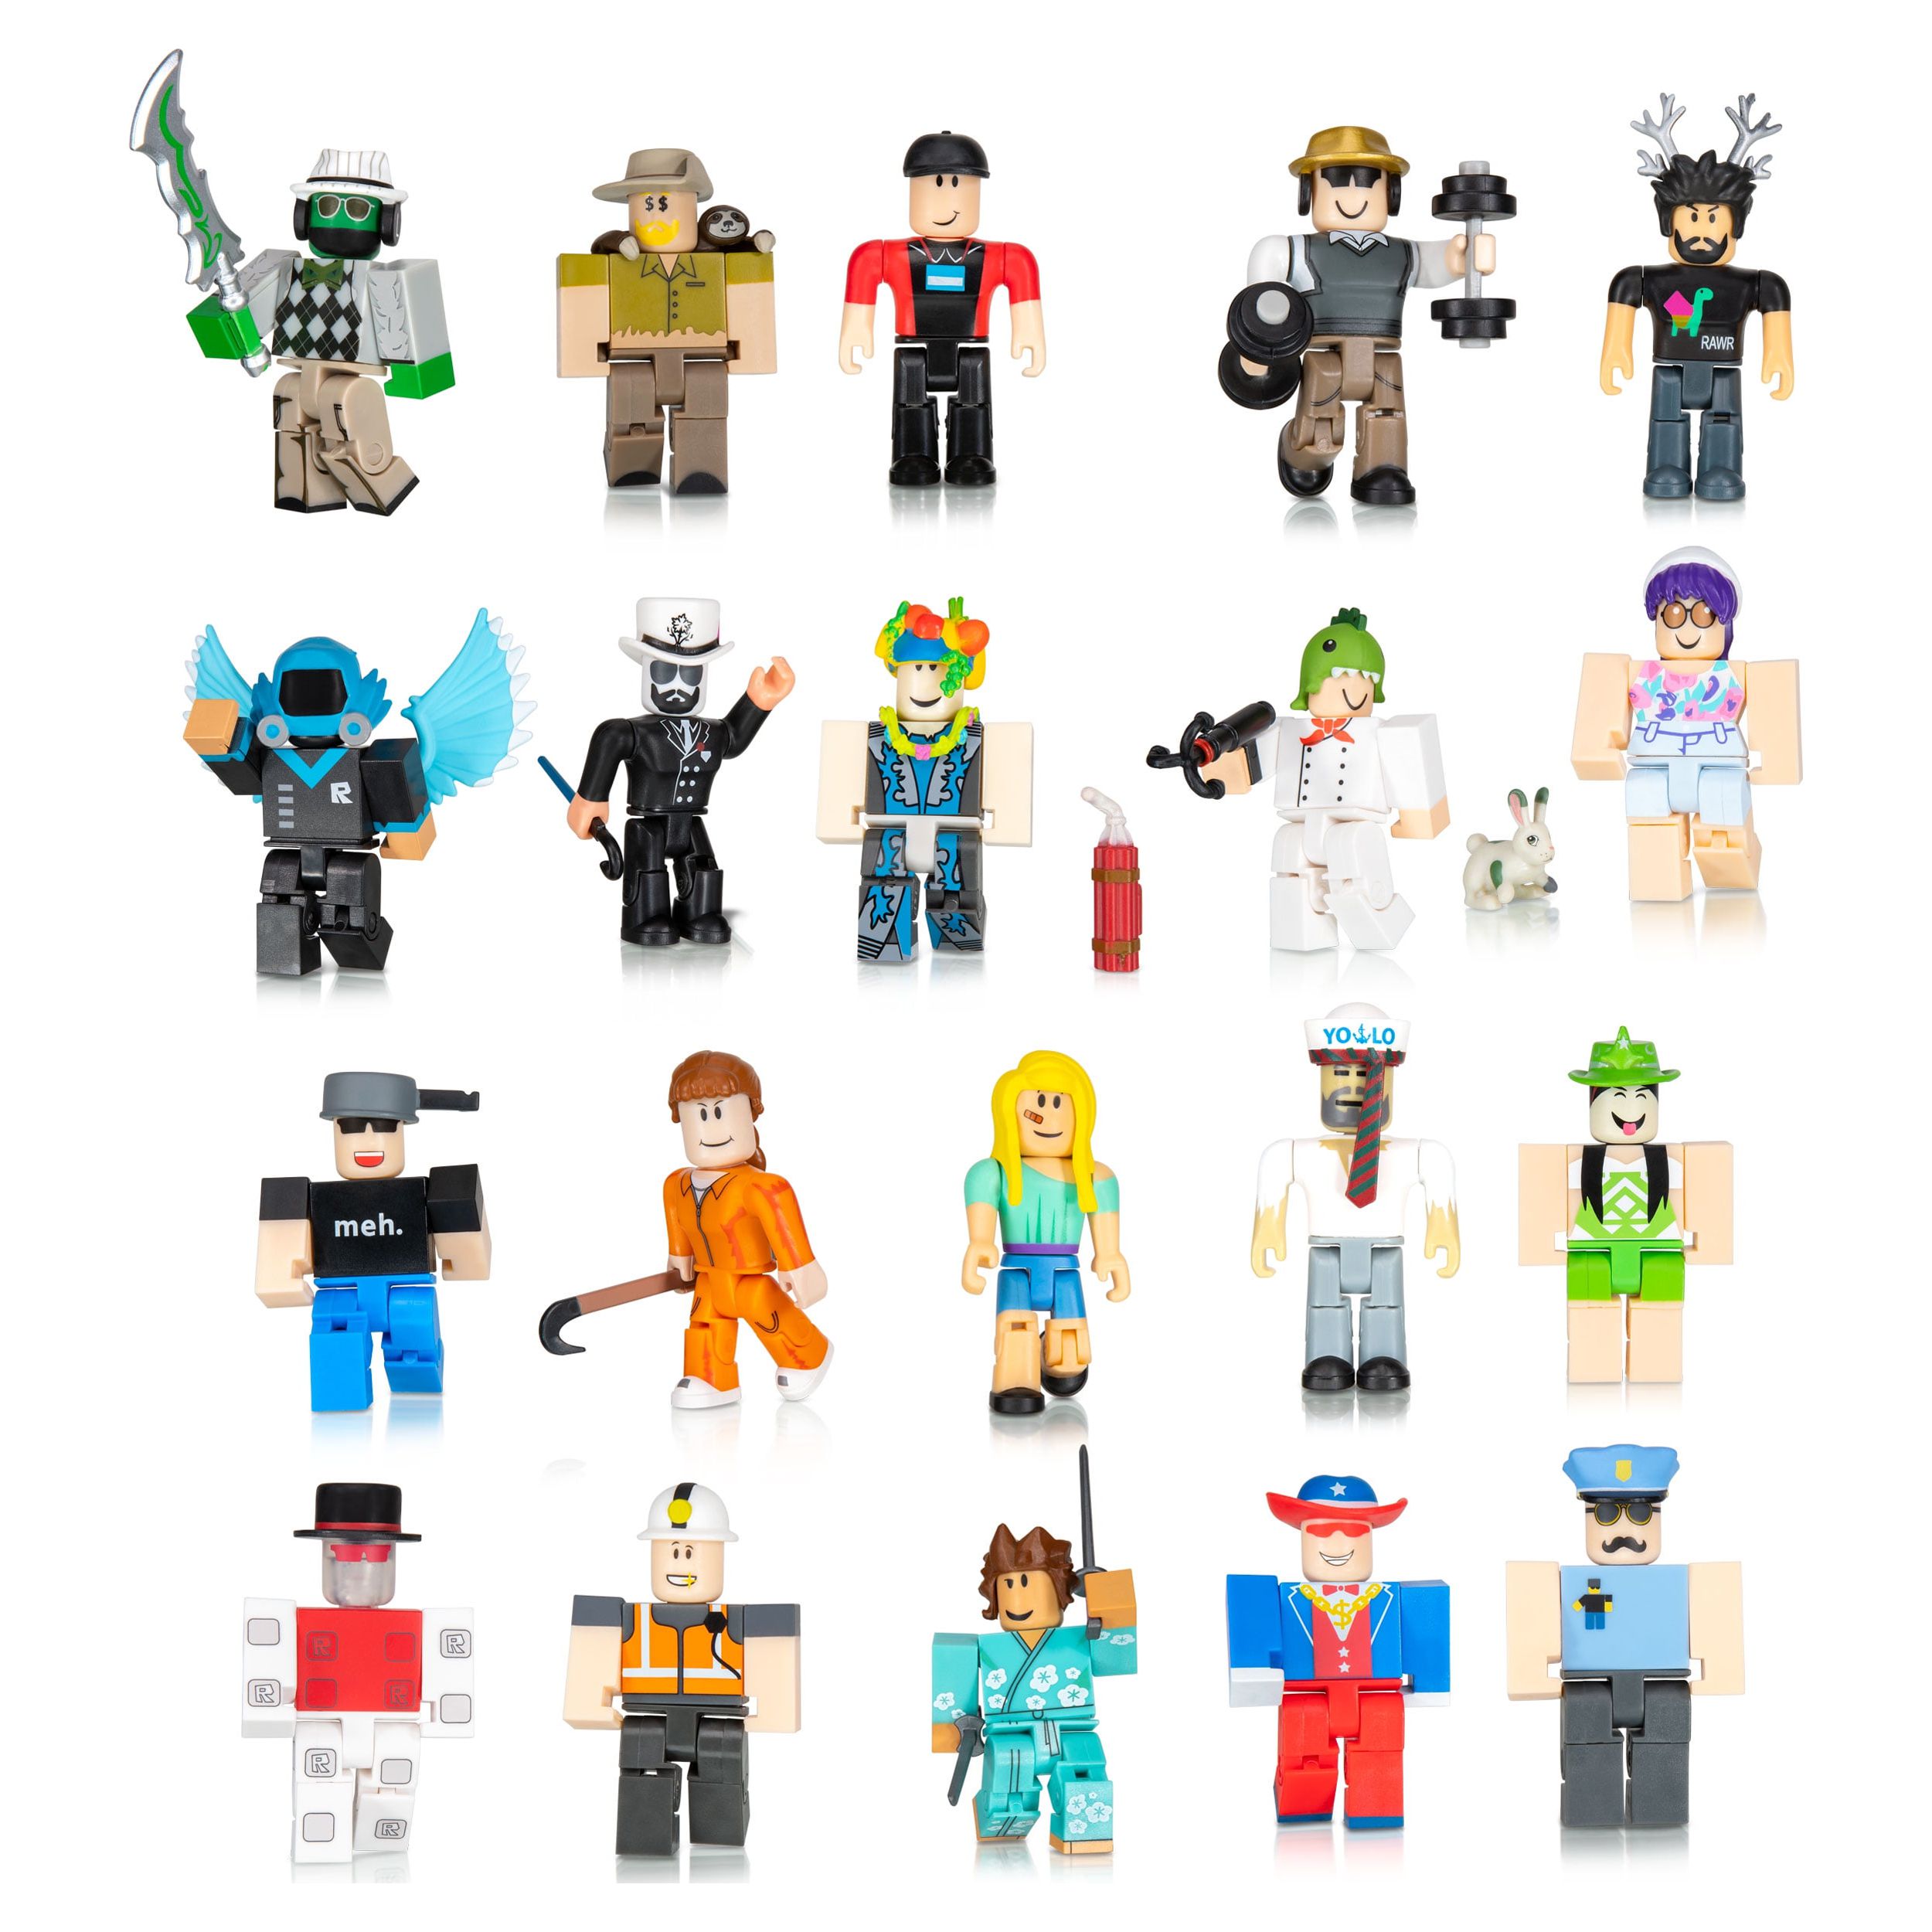 Roblox Action Collection - From the Vault 20 Figure Pack [Includes 20  Exclusive Virtual Items] 